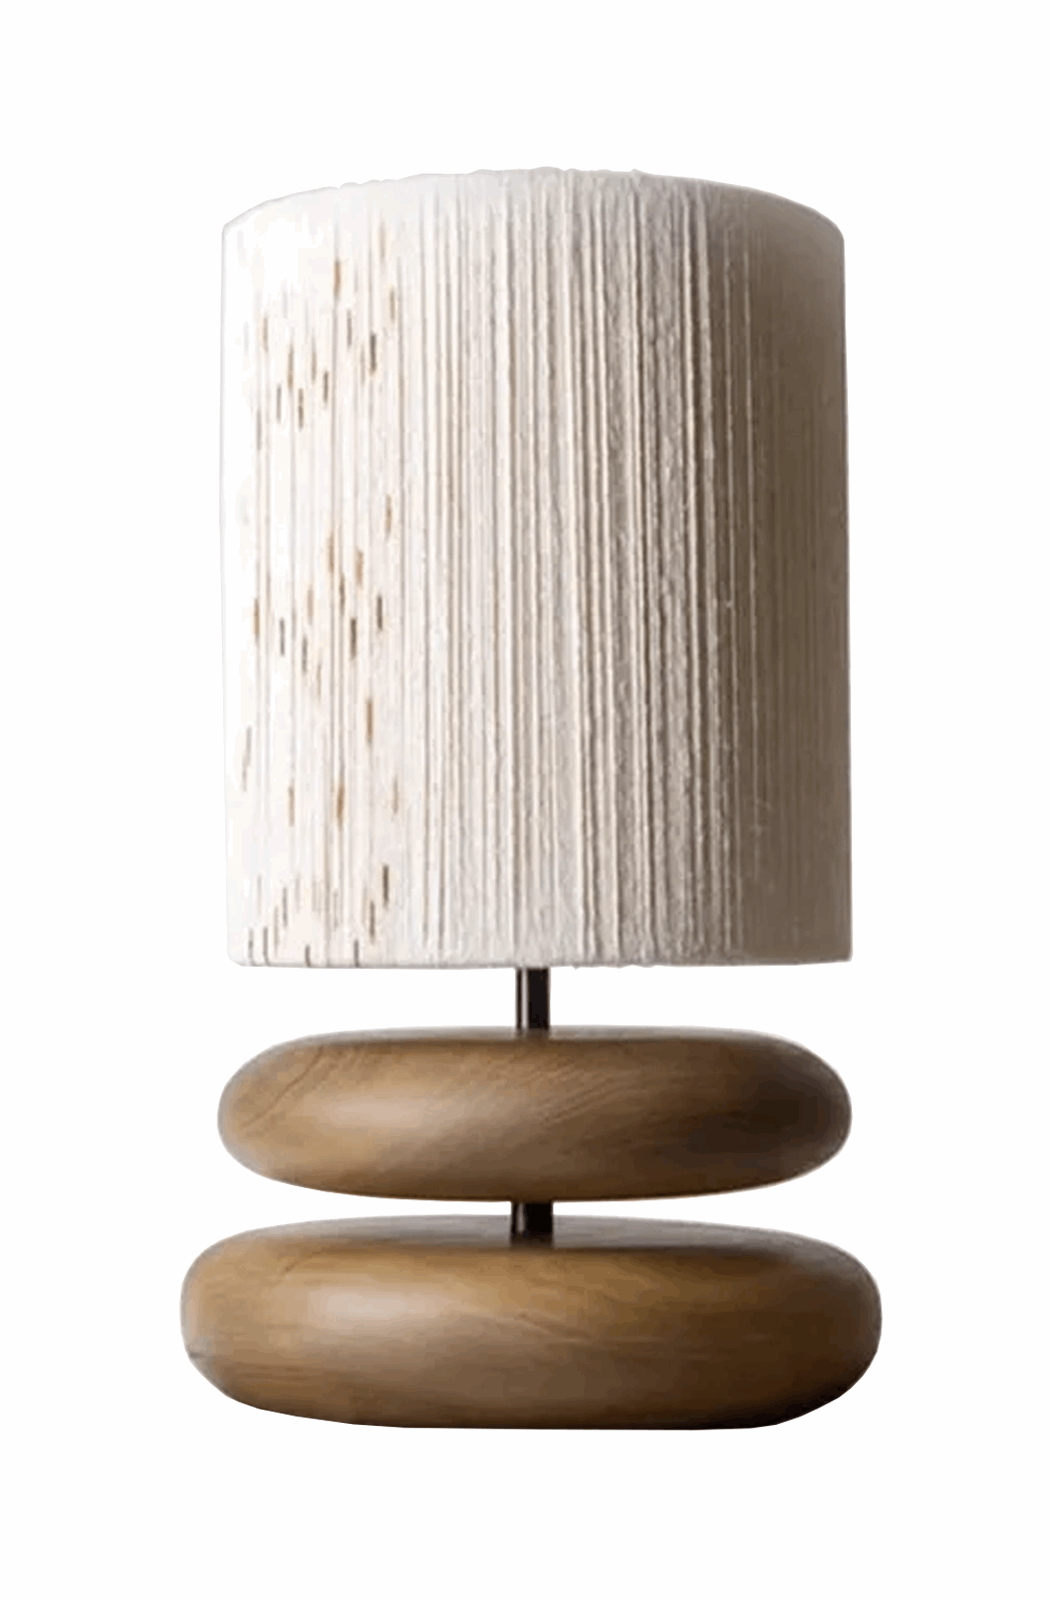 African modern table lamp made by wood and cords